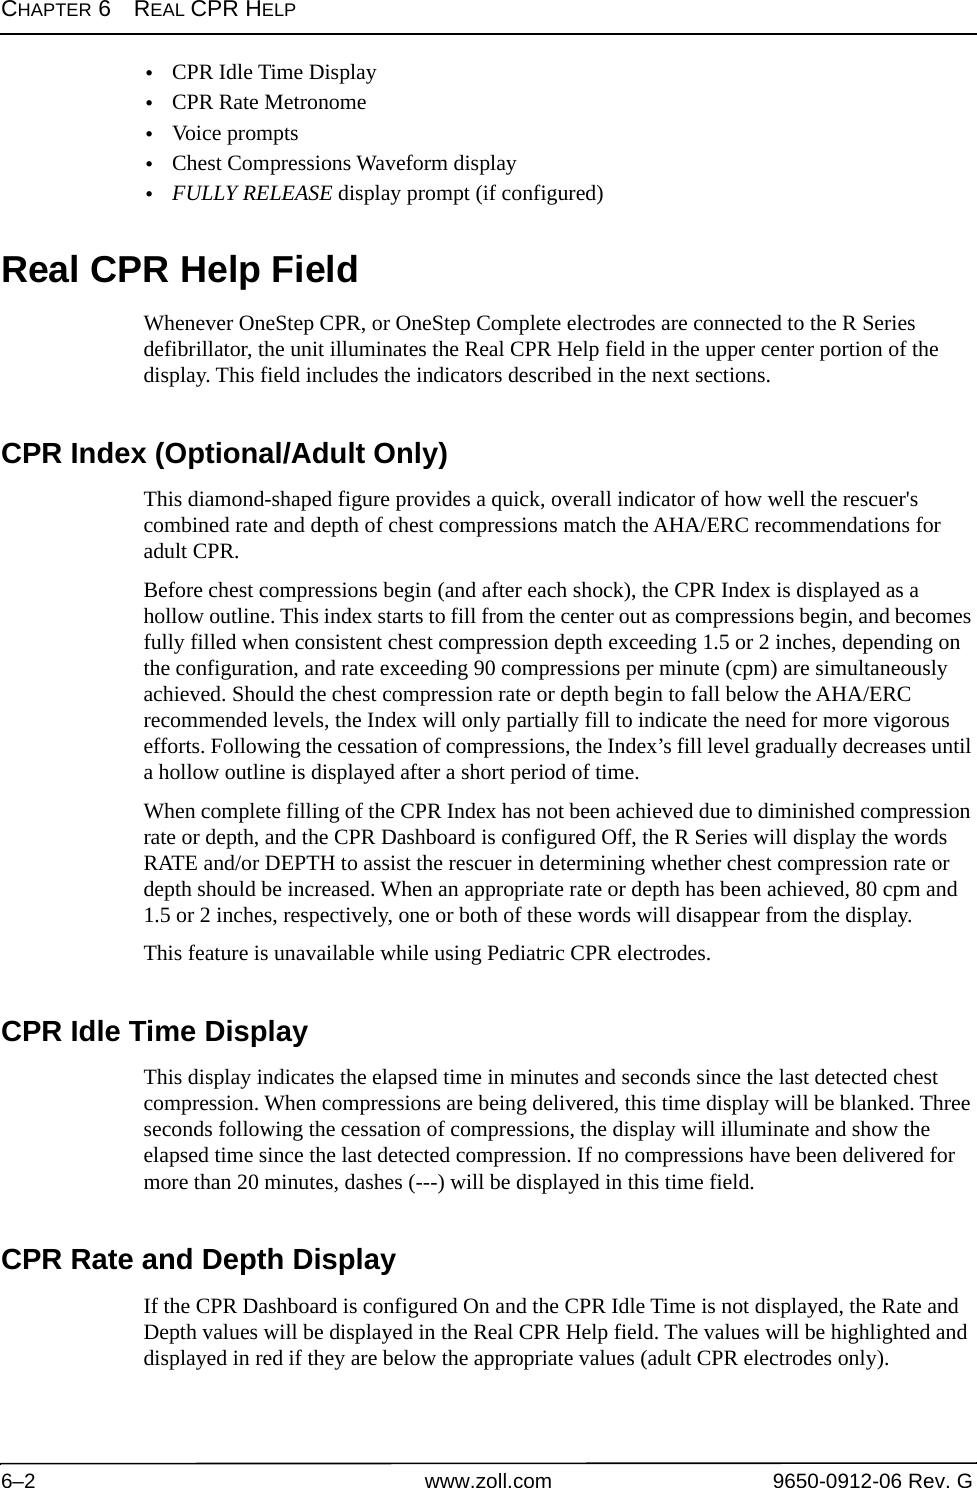 CHAPTER 6REAL CPR HELP6–2 www.zoll.com 9650-0912-06 Rev. G•CPR Idle Time Display •CPR Rate Metronome •Voice prompts•Chest Compressions Waveform display•FULLY RELEASE display prompt (if configured)Real CPR Help FieldWhenever OneStep CPR, or OneStep Complete electrodes are connected to the R Series defibrillator, the unit illuminates the Real CPR Help field in the upper center portion of the display. This field includes the indicators described in the next sections.CPR Index (Optional/Adult Only)This diamond-shaped figure provides a quick, overall indicator of how well the rescuer&apos;s combined rate and depth of chest compressions match the AHA/ERC recommendations for adult CPR. Before chest compressions begin (and after each shock), the CPR Index is displayed as a hollow outline. This index starts to fill from the center out as compressions begin, and becomes fully filled when consistent chest compression depth exceeding 1.5 or 2 inches, depending on the configuration, and rate exceeding 90 compressions per minute (cpm) are simultaneously achieved. Should the chest compression rate or depth begin to fall below the AHA/ERC recommended levels, the Index will only partially fill to indicate the need for more vigorous efforts. Following the cessation of compressions, the Index’s fill level gradually decreases until a hollow outline is displayed after a short period of time. When complete filling of the CPR Index has not been achieved due to diminished compression rate or depth, and the CPR Dashboard is configured Off, the R Series will display the words RATE and/or DEPTH to assist the rescuer in determining whether chest compression rate or depth should be increased. When an appropriate rate or depth has been achieved, 80 cpm and 1.5 or 2 inches, respectively, one or both of these words will disappear from the display. This feature is unavailable while using Pediatric CPR electrodes.CPR Idle Time DisplayThis display indicates the elapsed time in minutes and seconds since the last detected chest compression. When compressions are being delivered, this time display will be blanked. Three seconds following the cessation of compressions, the display will illuminate and show the elapsed time since the last detected compression. If no compressions have been delivered for more than 20 minutes, dashes (---) will be displayed in this time field.CPR Rate and Depth Display If the CPR Dashboard is configured On and the CPR Idle Time is not displayed, the Rate and Depth values will be displayed in the Real CPR Help field. The values will be highlighted and displayed in red if they are below the appropriate values (adult CPR electrodes only).